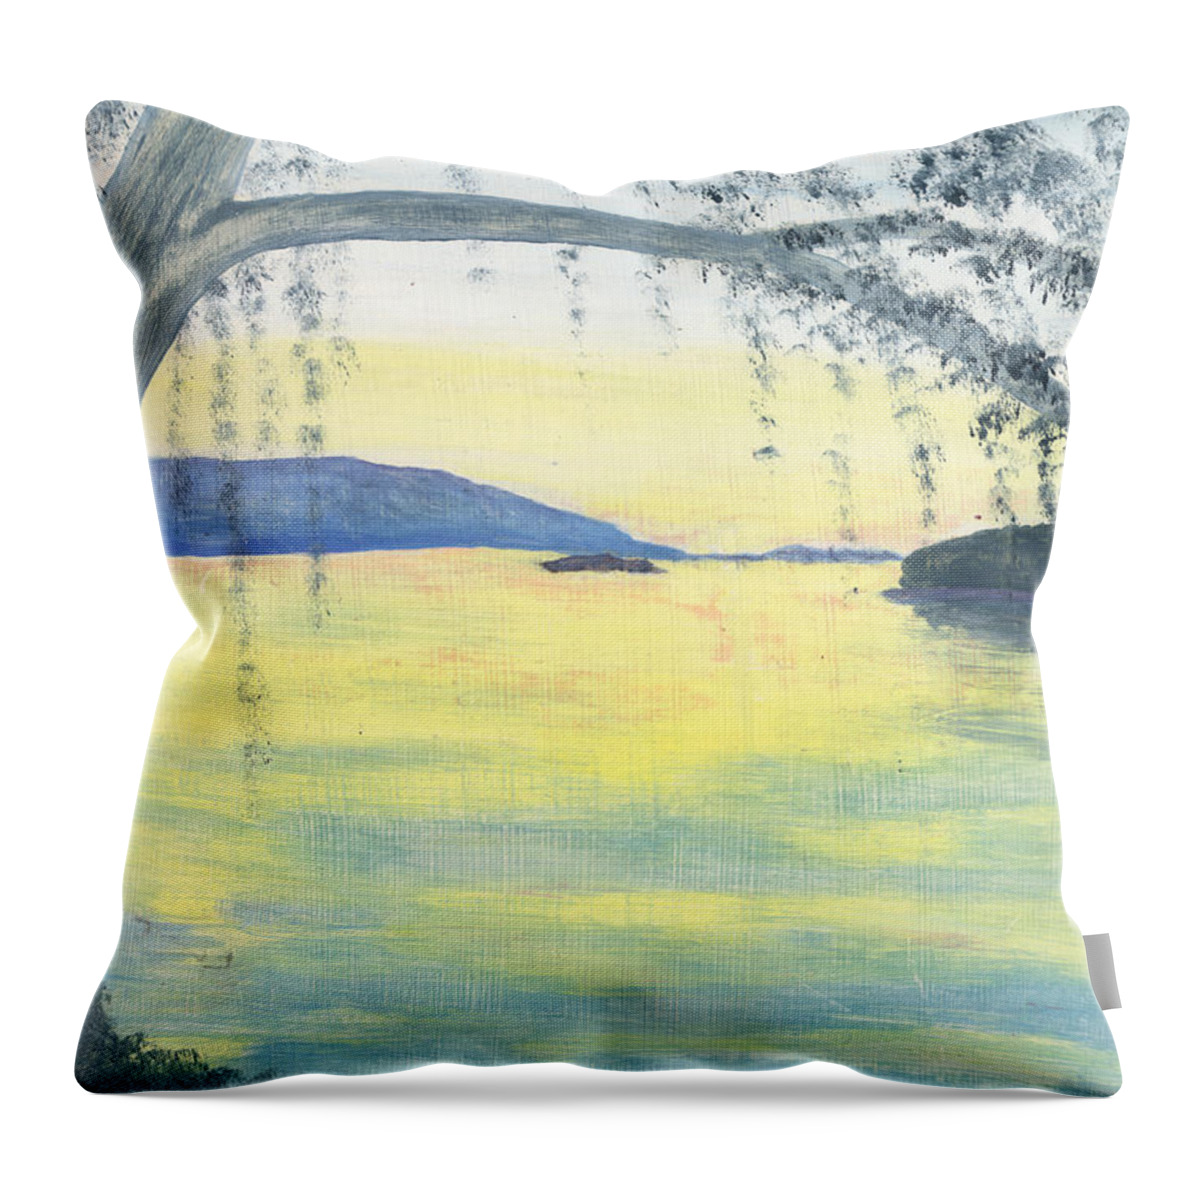 Landscape Throw Pillow featuring the painting Sunset over Water by Stephanie Grant